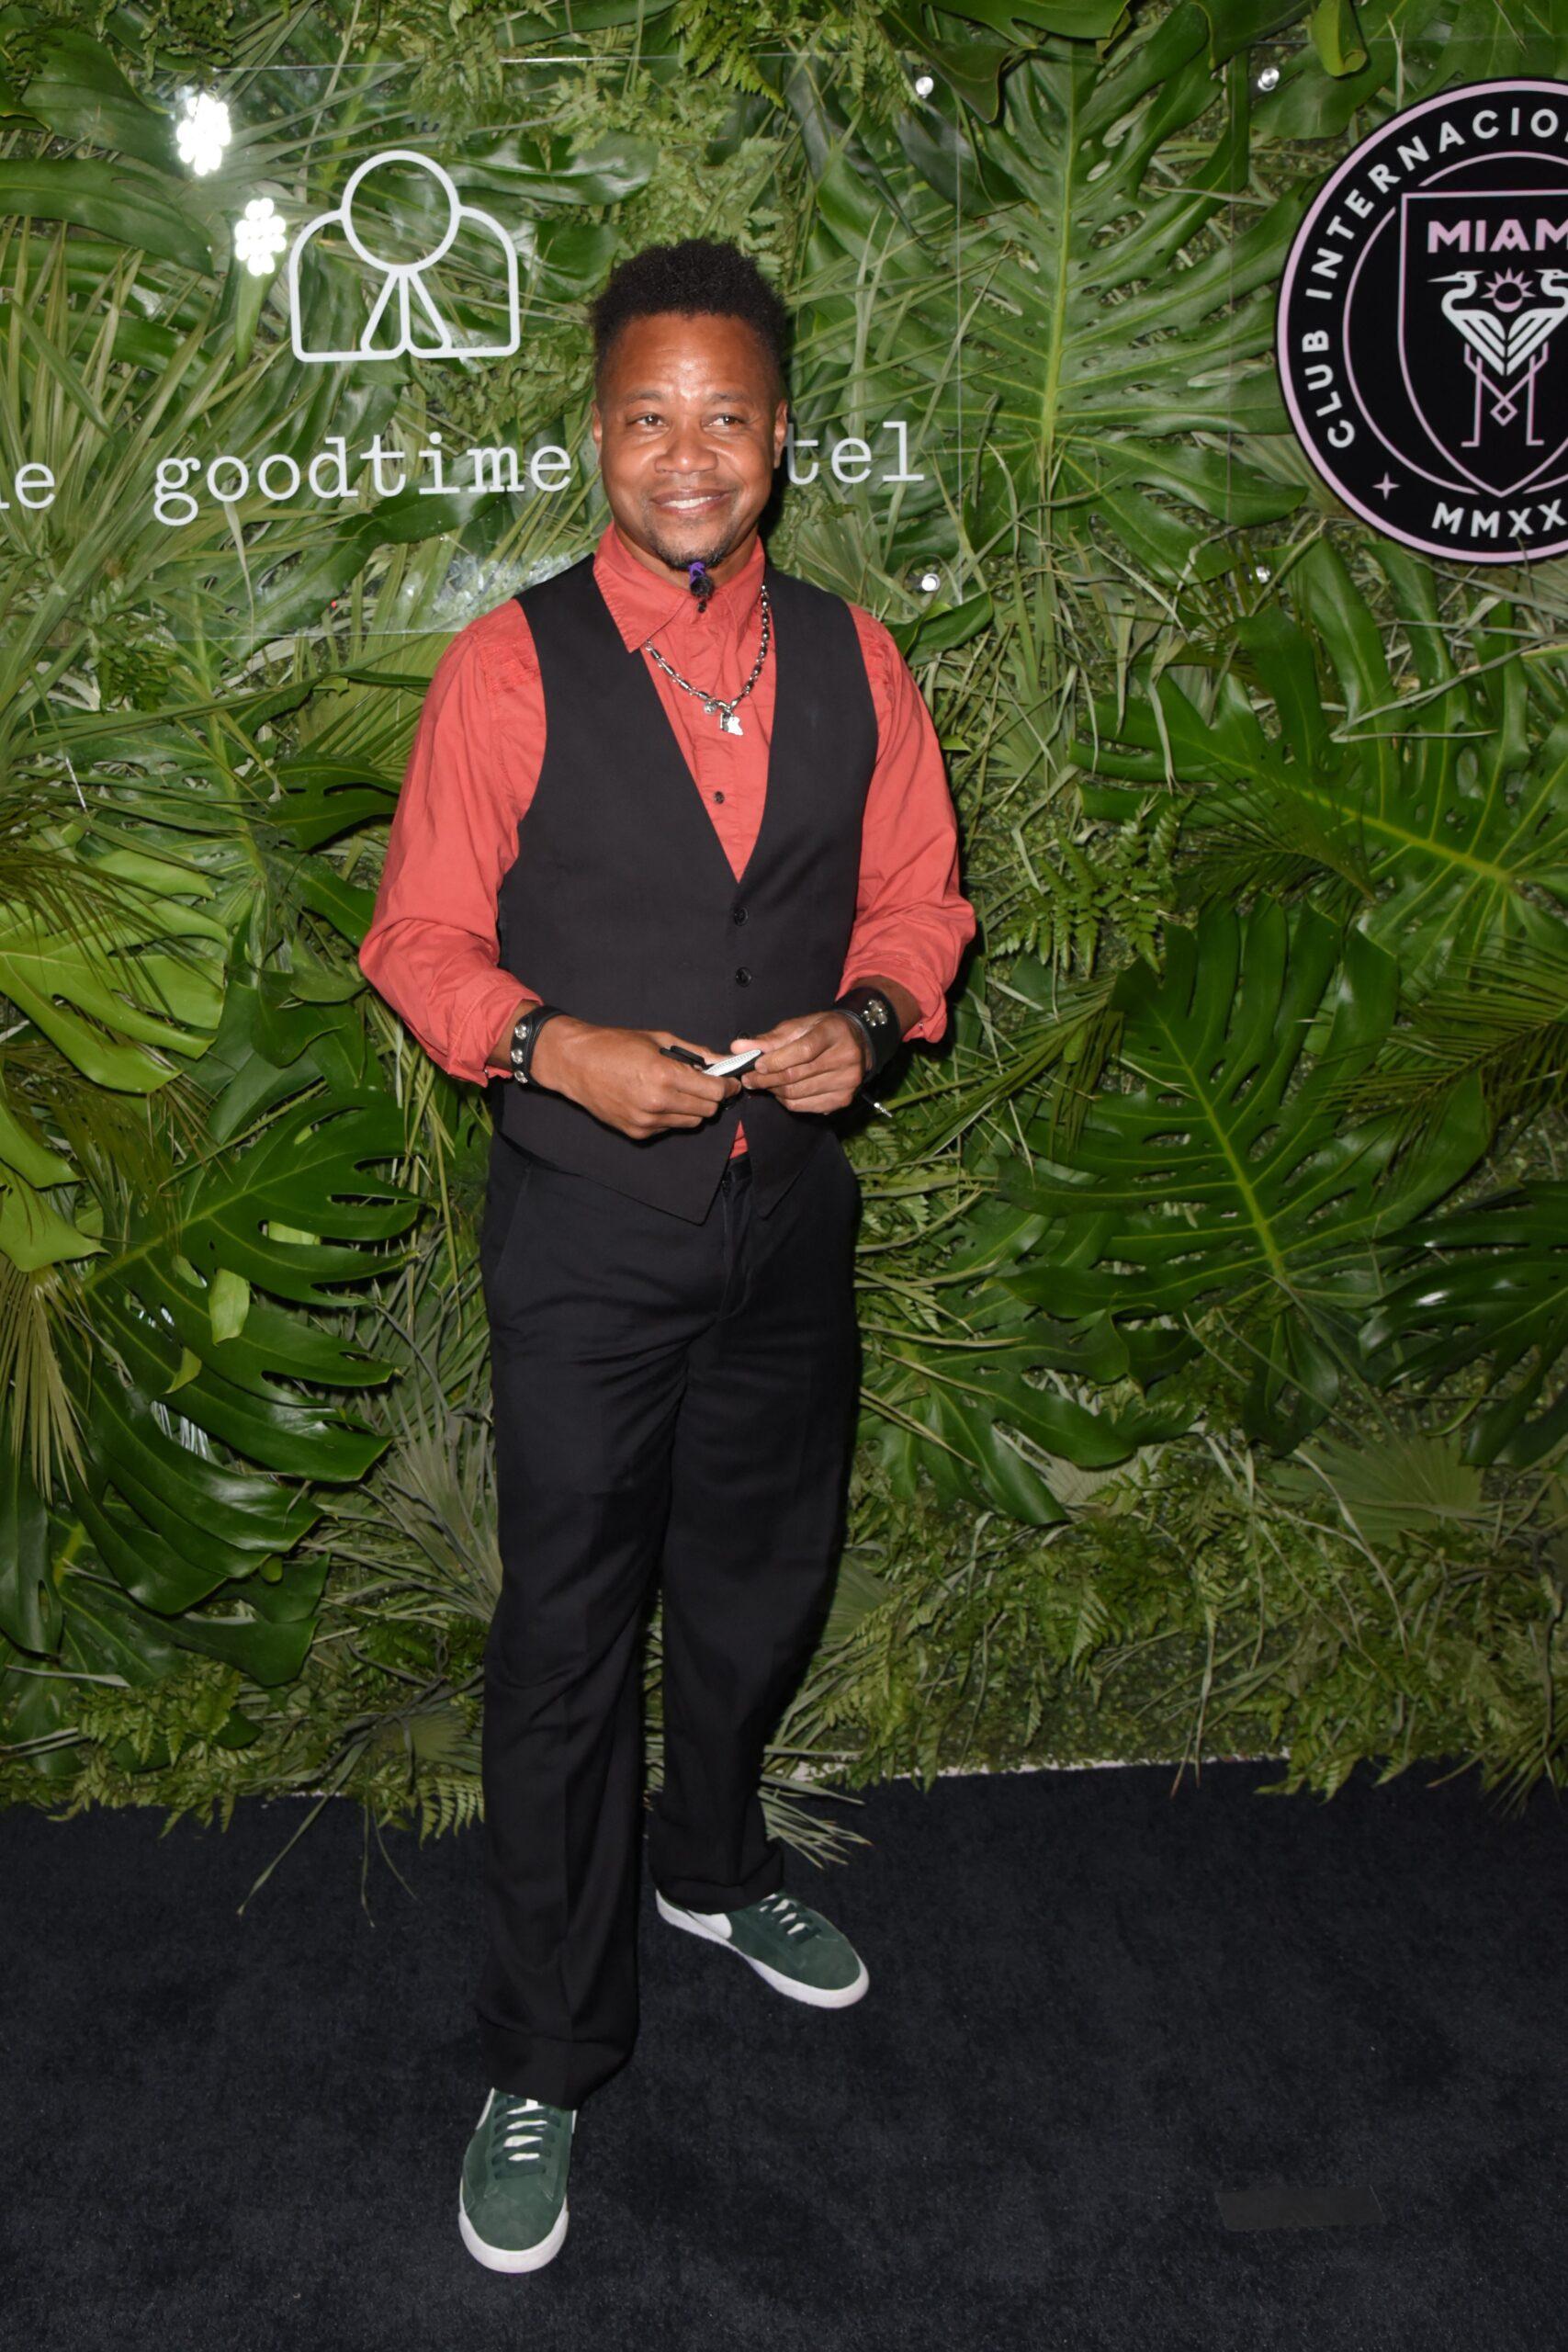 Cuba Gooding Jnr at the opening of the The Goodtime Hotel Miami in Miami Beach